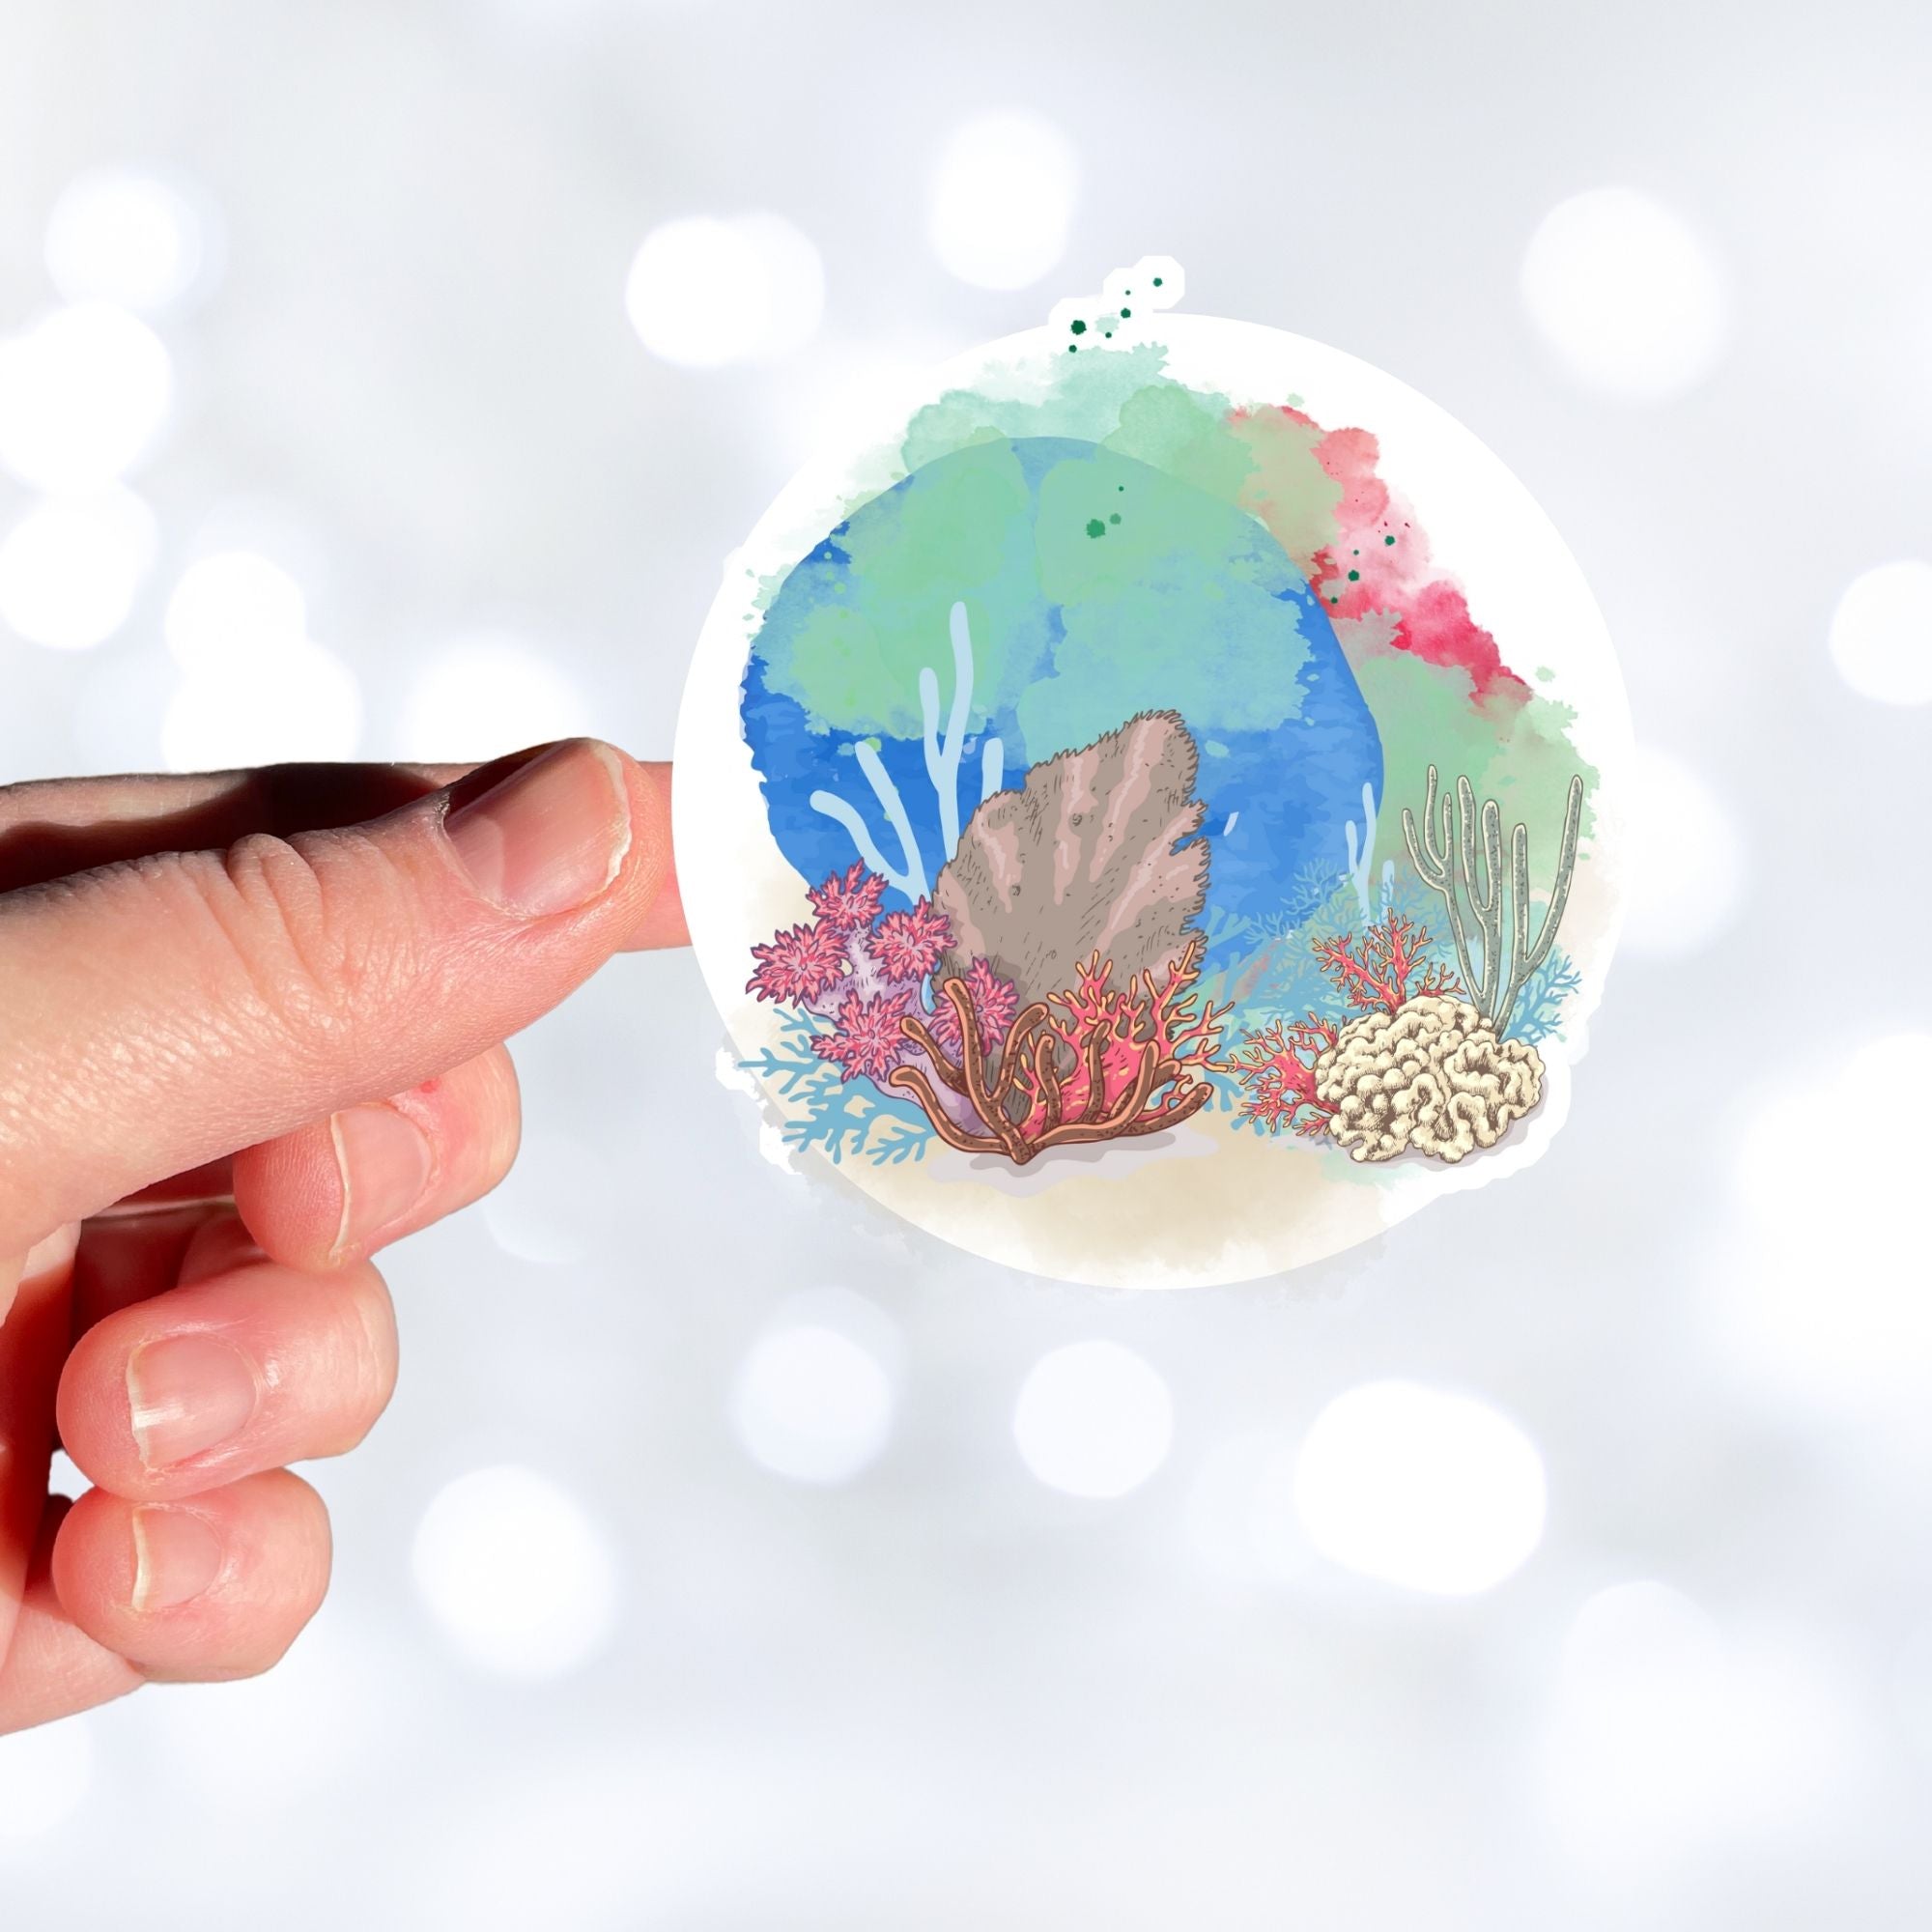 This underwater scene features corals, sand, and a pastel watercolor background on an individual die-cut sticker. With this sticker you can take the reef with you anywhere you go! This image shows a hand holding the Watercolor Reef sticker.